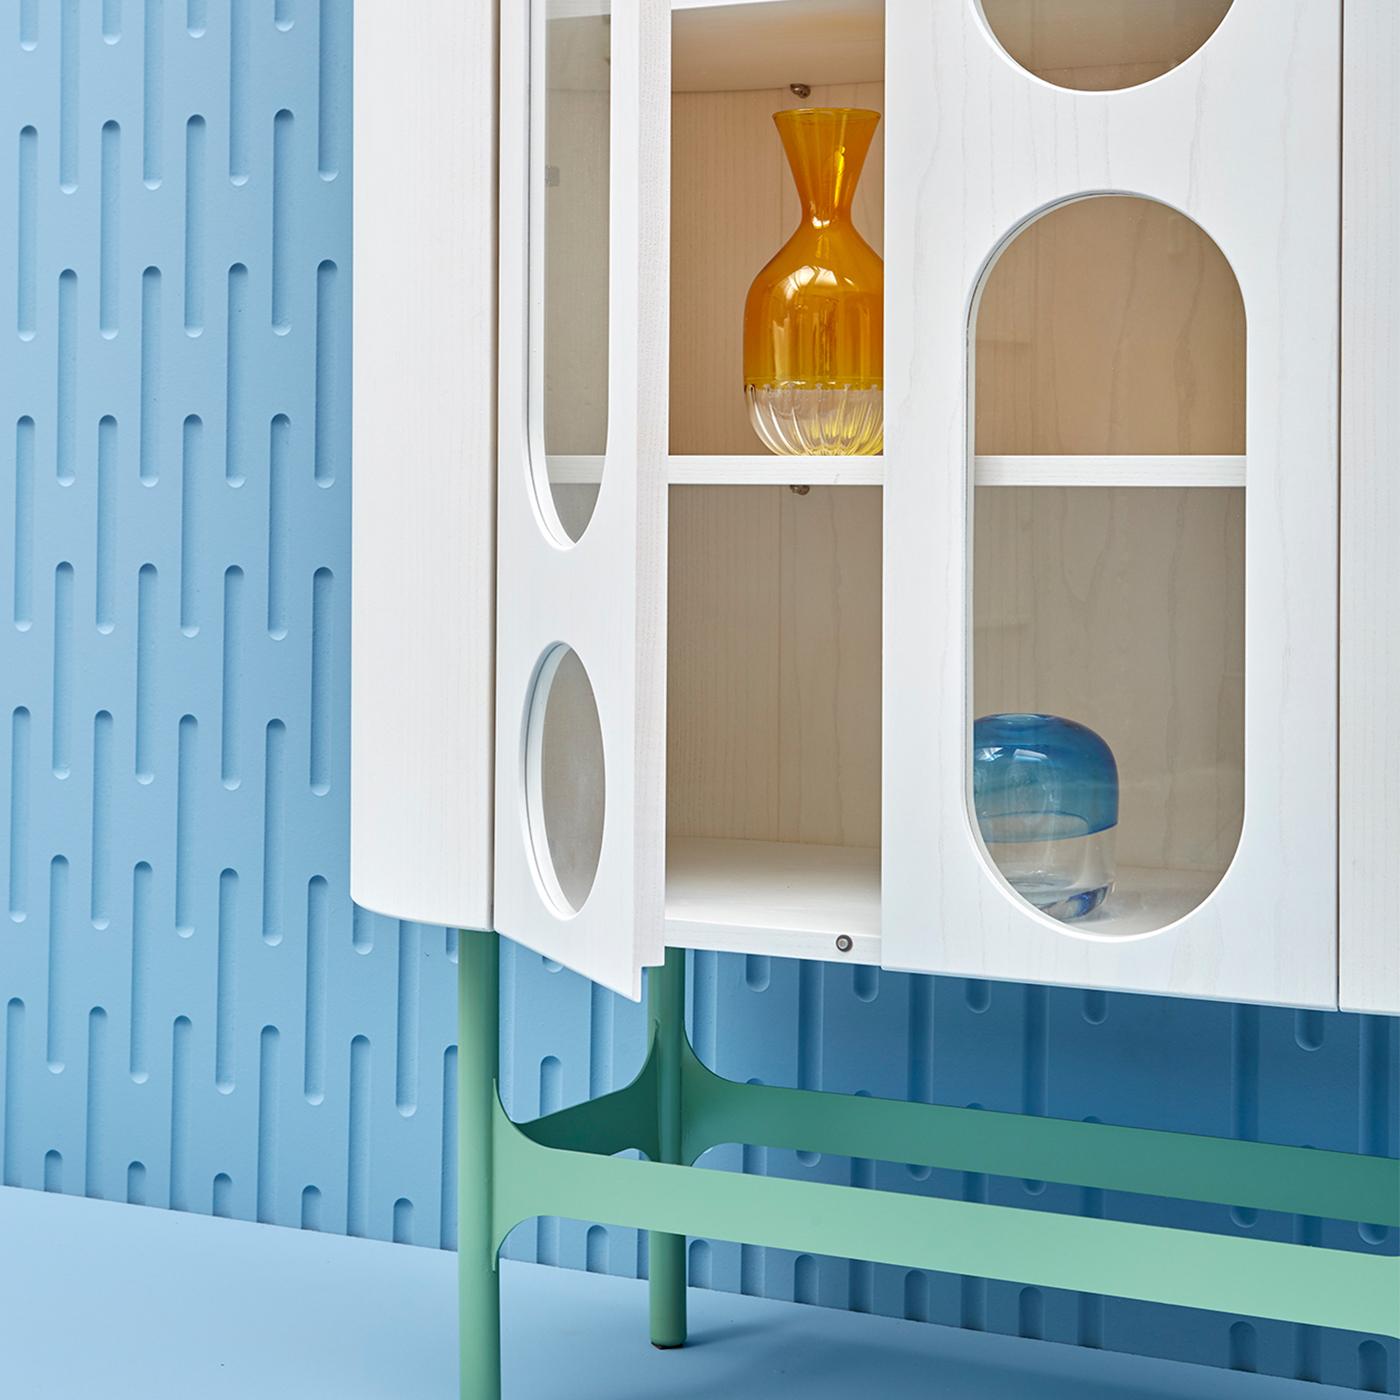 Boasting an elegant rounded silhouette, the Oblò B Cabinet designed by Matteo Zorzenoni has a white-lacquered ash wood frame raised on a four-legged metal base in a pastel blue finish. The distinctive feature of the collection is the cut-out design